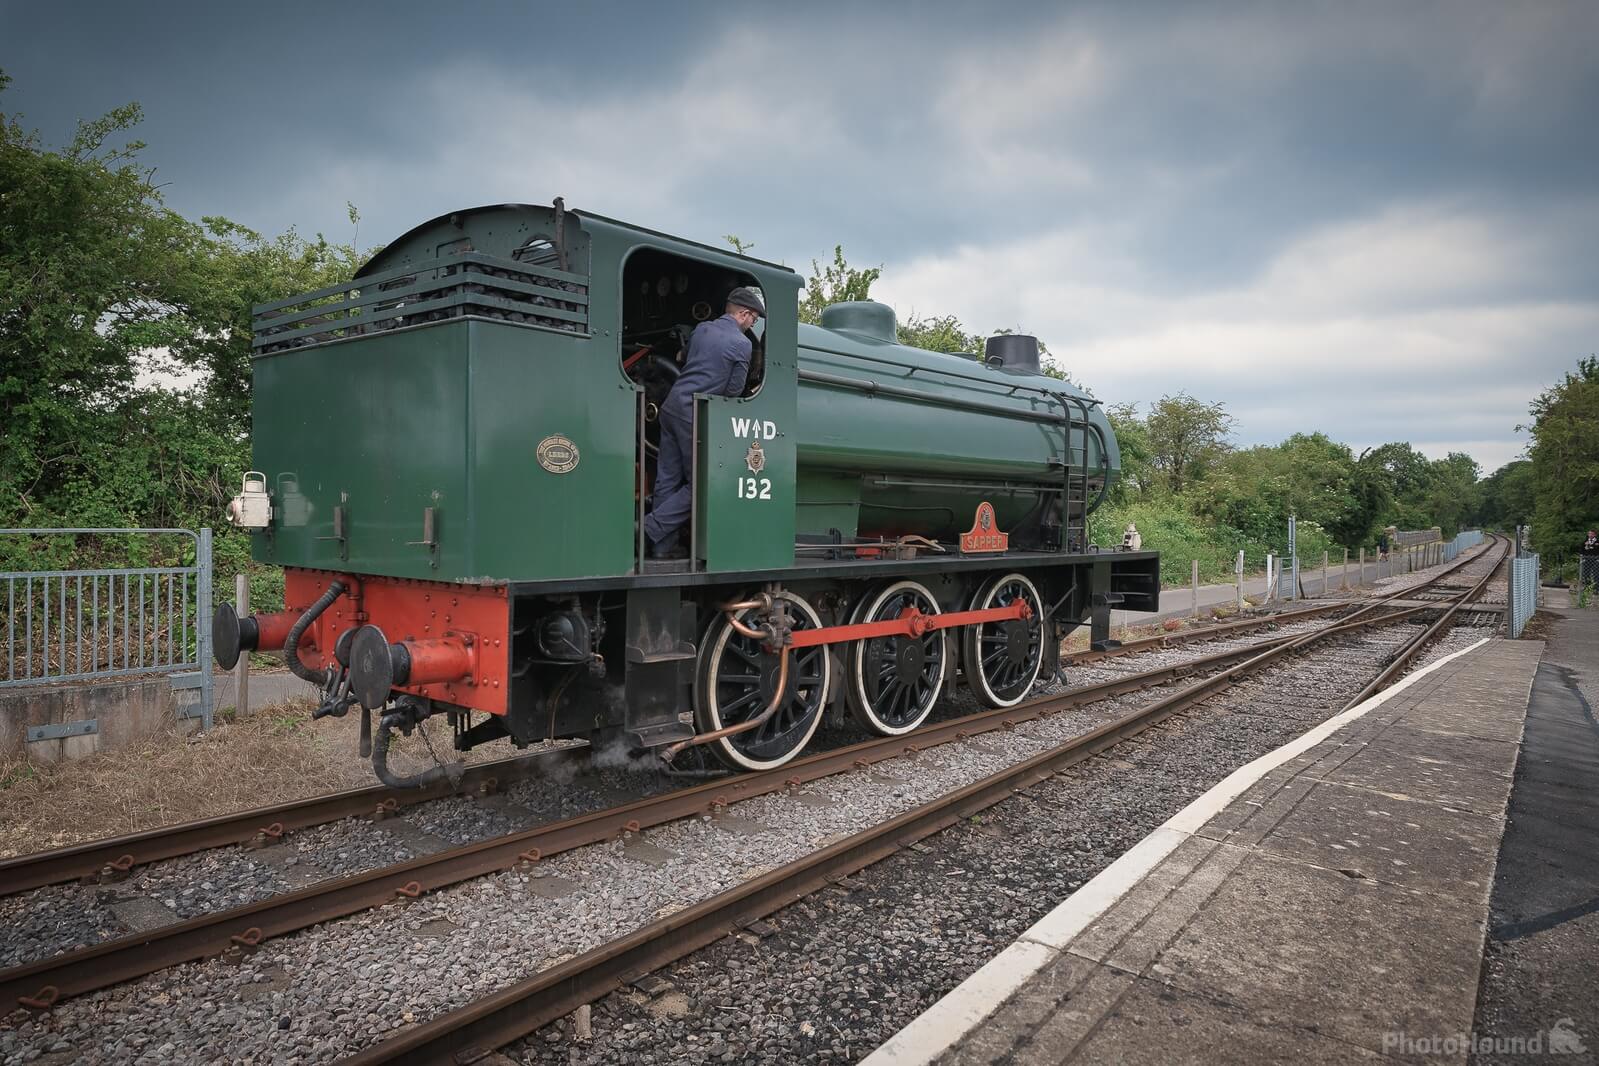 Image of Avon Valley Railway by Mathew Browne